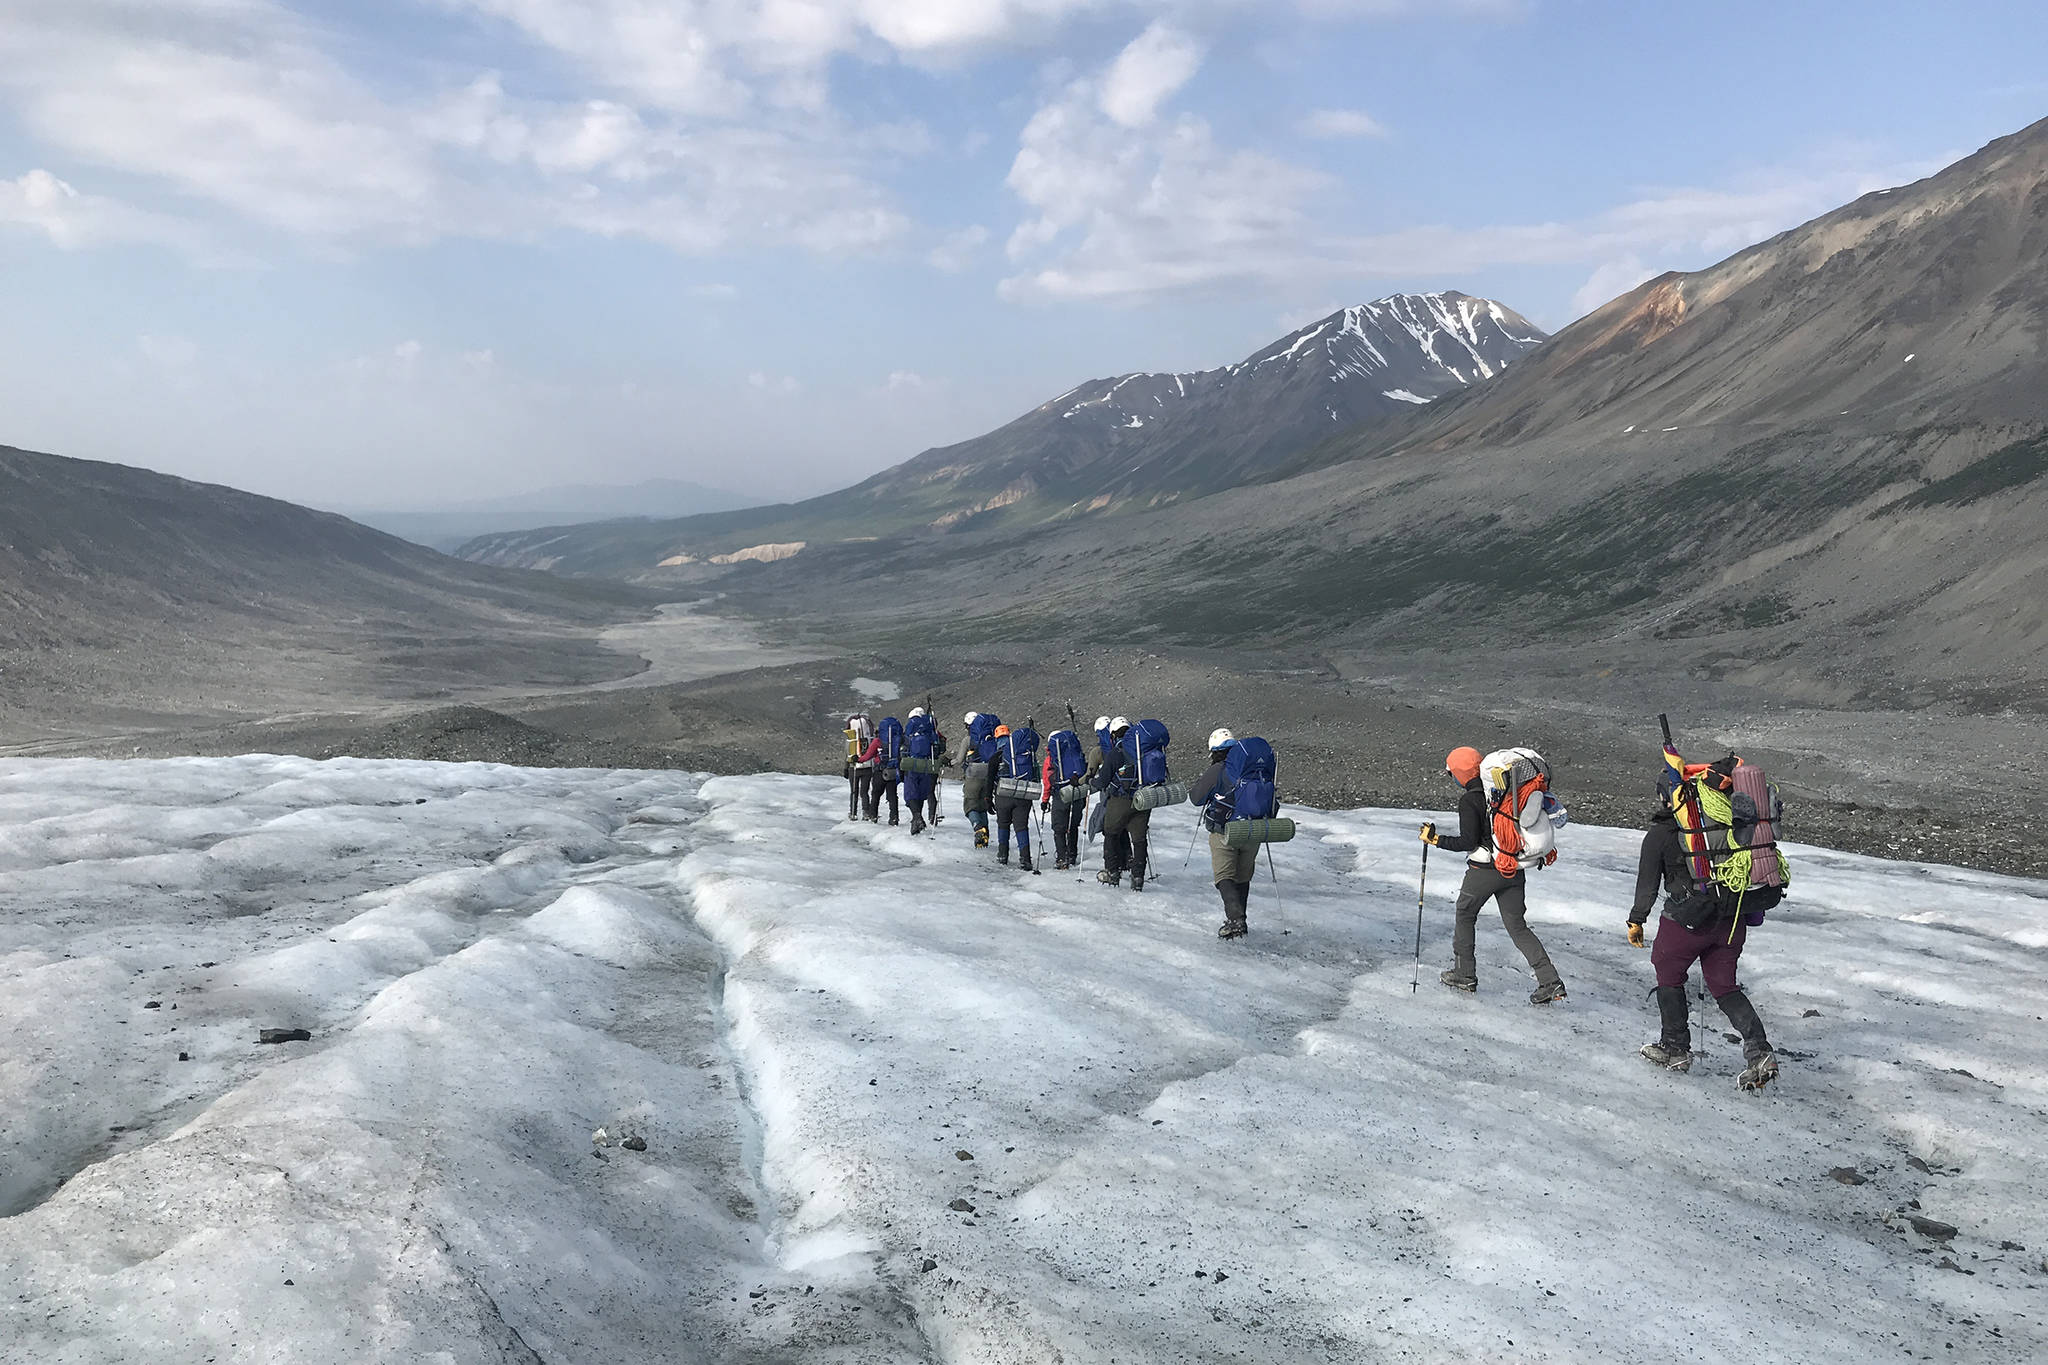 Courtesy Photo / Erin Cutts, Inspiring Girls Expeditions
The 2019 Girls on Ice Alaska team travels down Gulkana Glacier at the end of their expedition. The group is currently accepting applications for three expeditions planned for this summer.